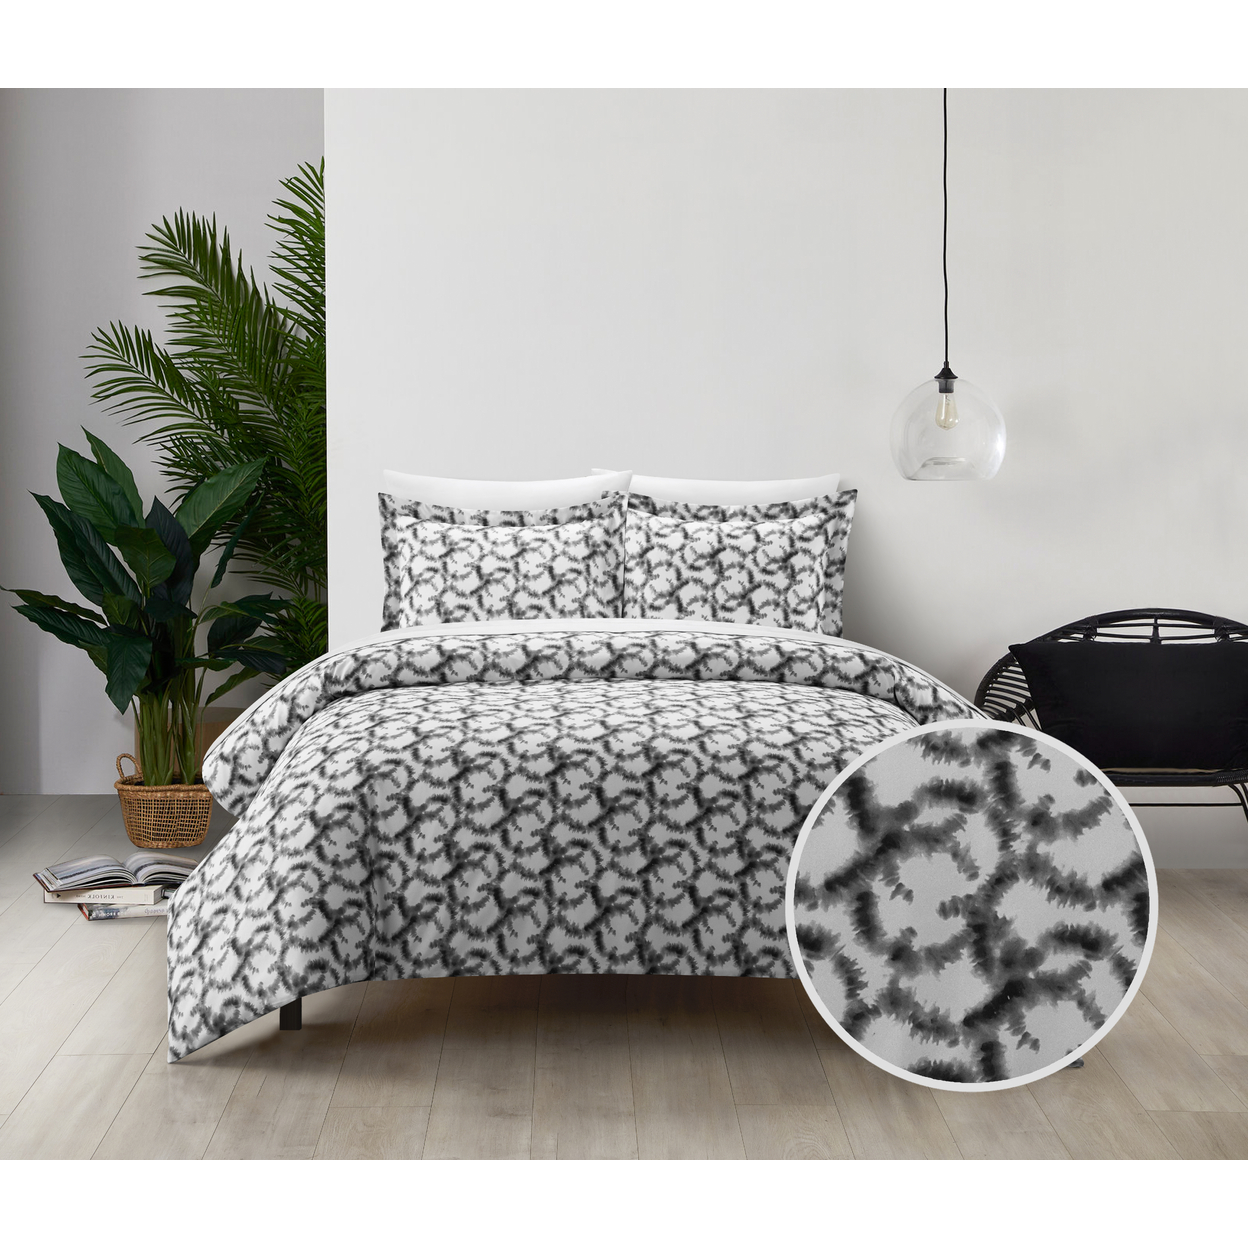 Khrissie 2 Or 3 Piece Duvet Cover Set Watercolor Overlapping Rings Pattern - Grey, Twin